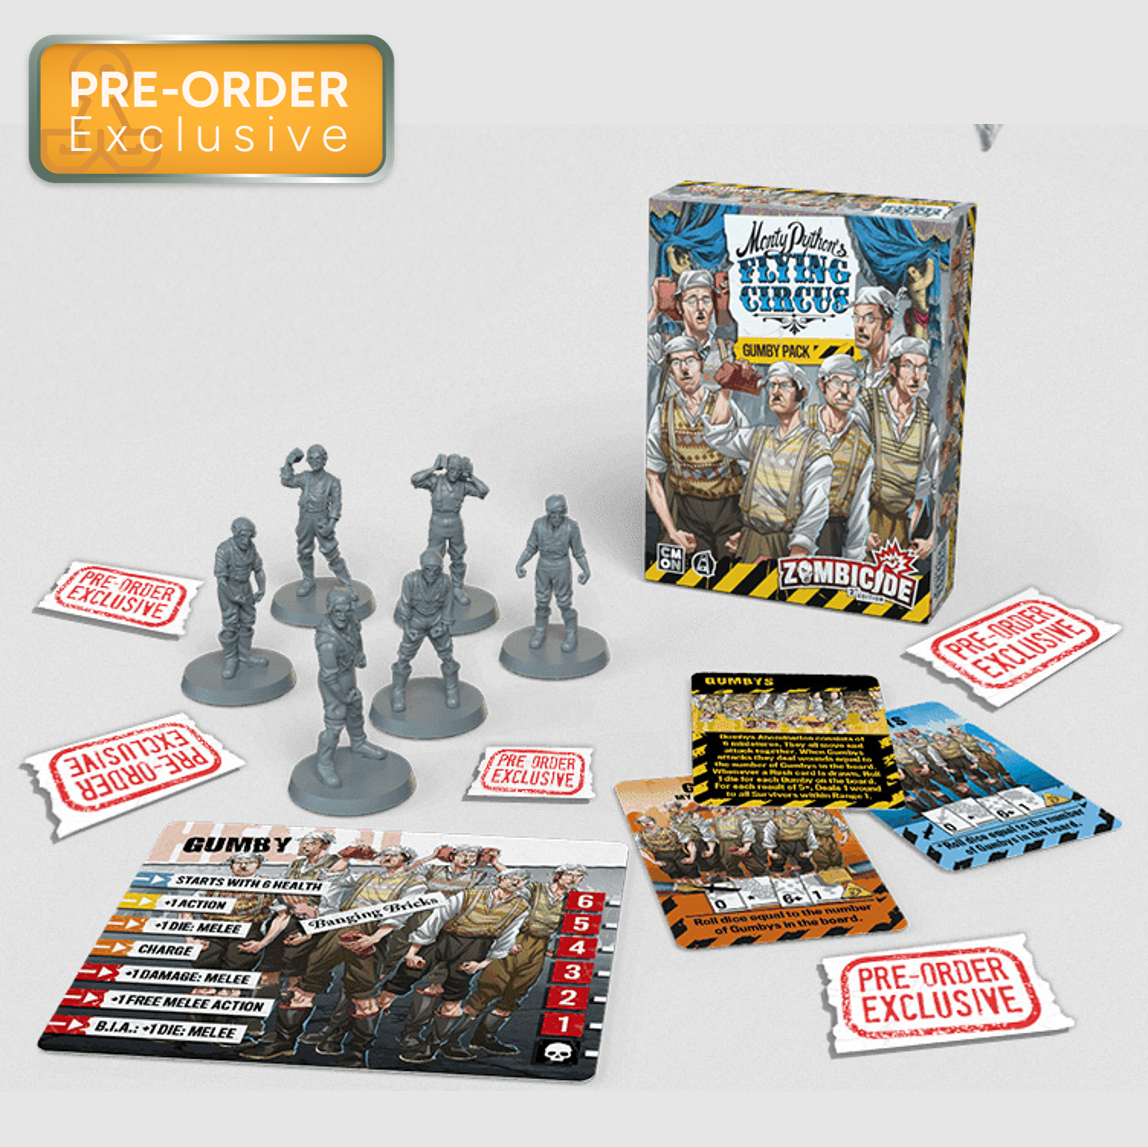 Exclusive Zombicide Monty Python's Flying Circus Gumbu Pack